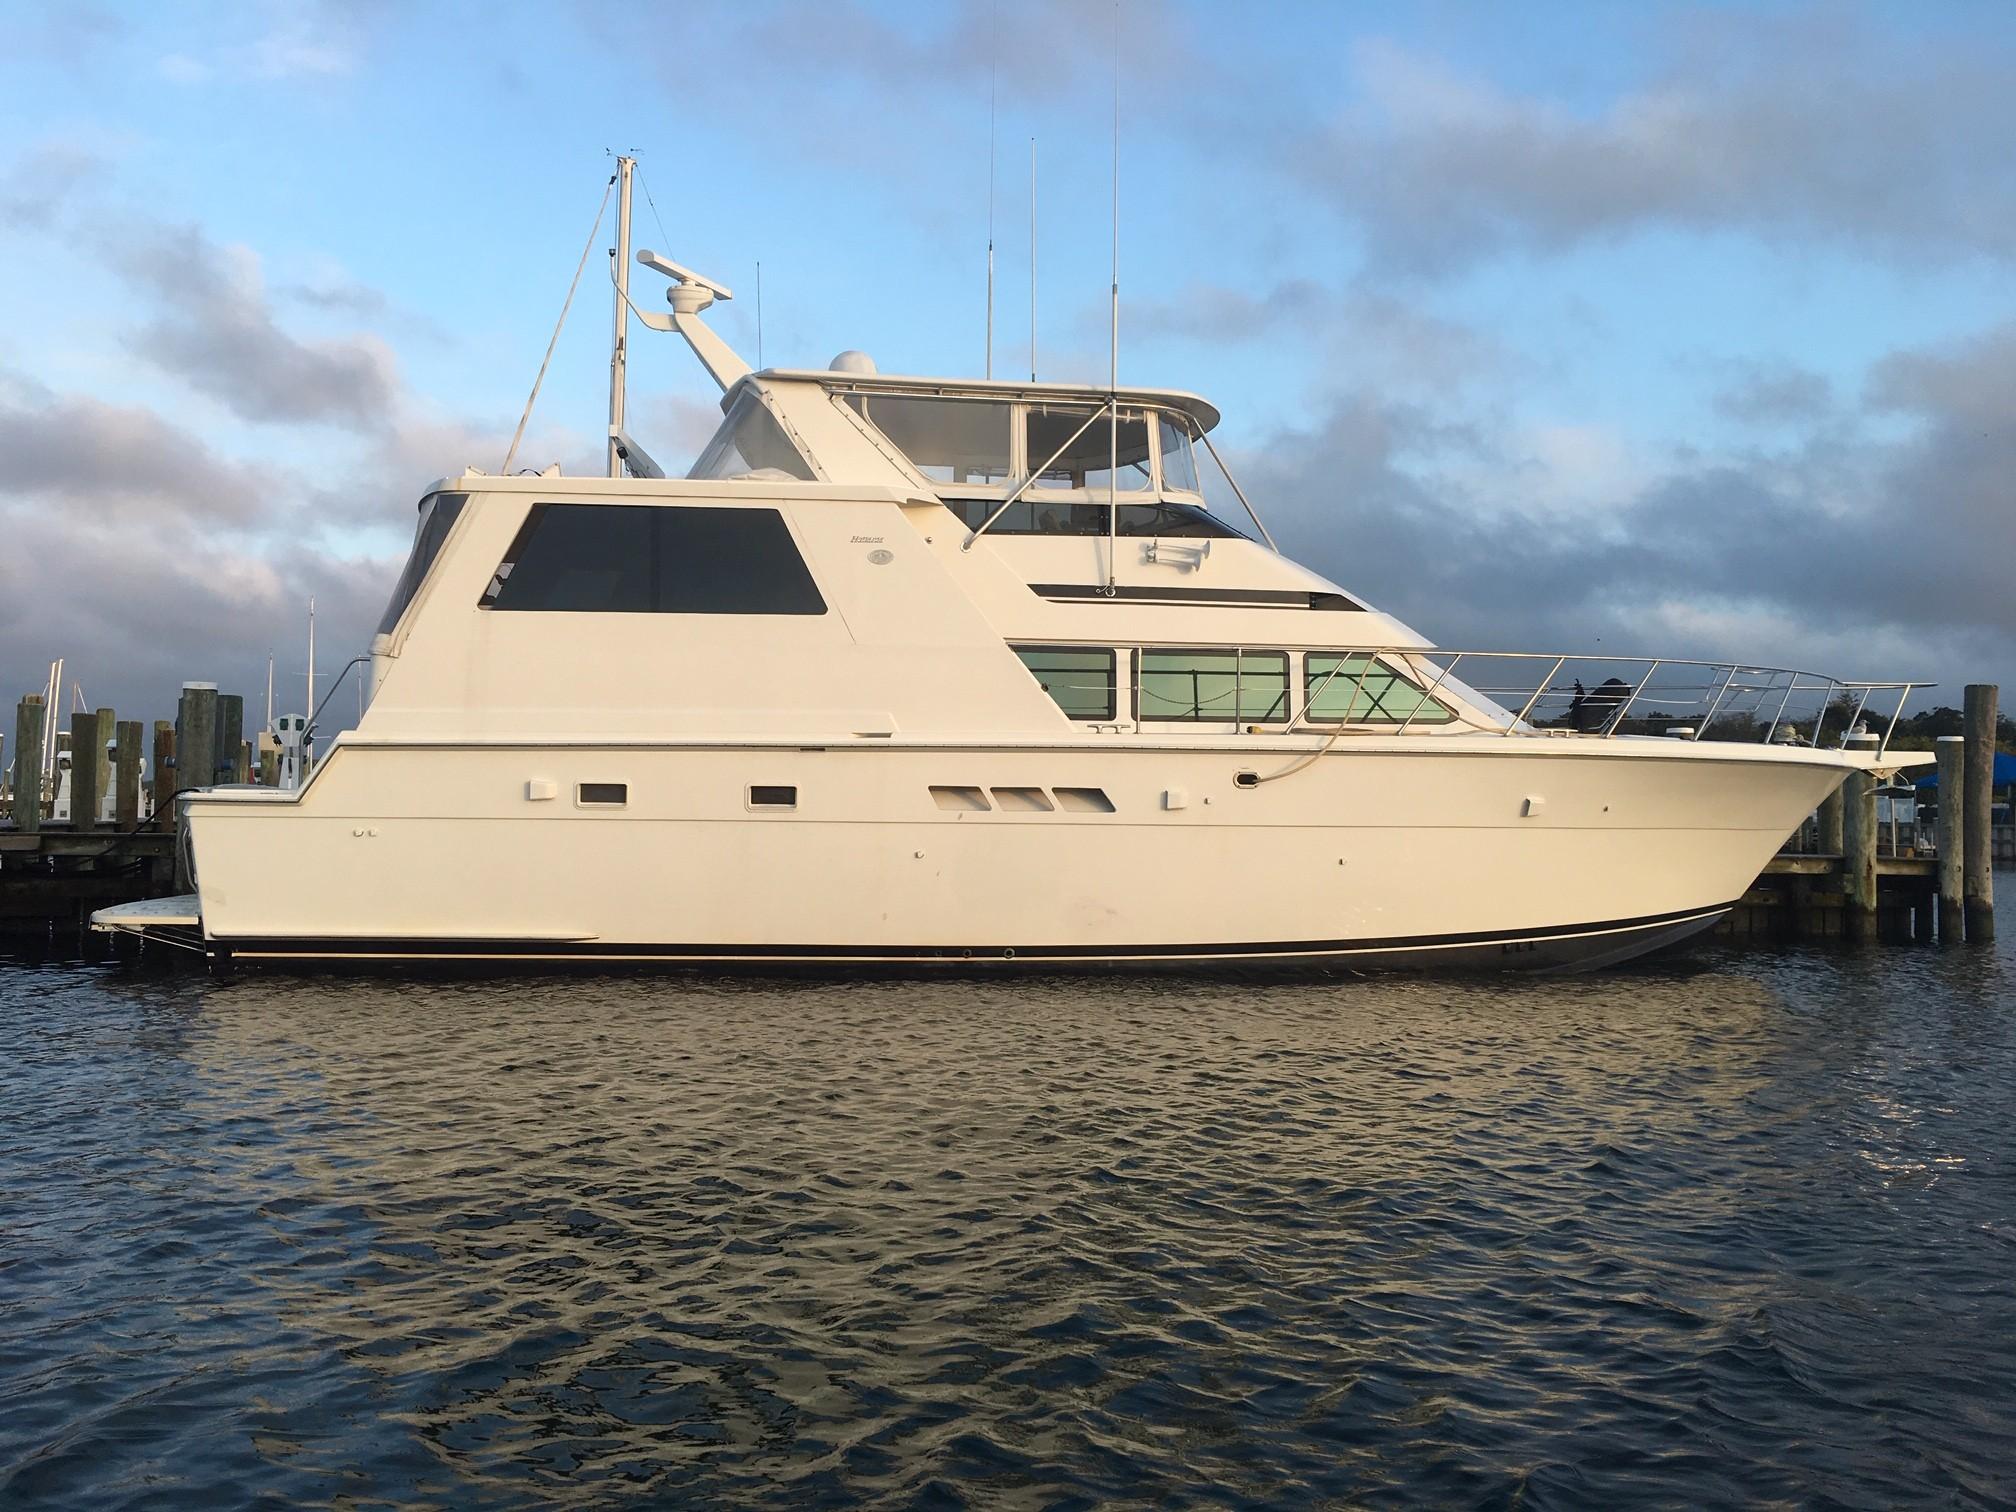 52 ft yachts for sale